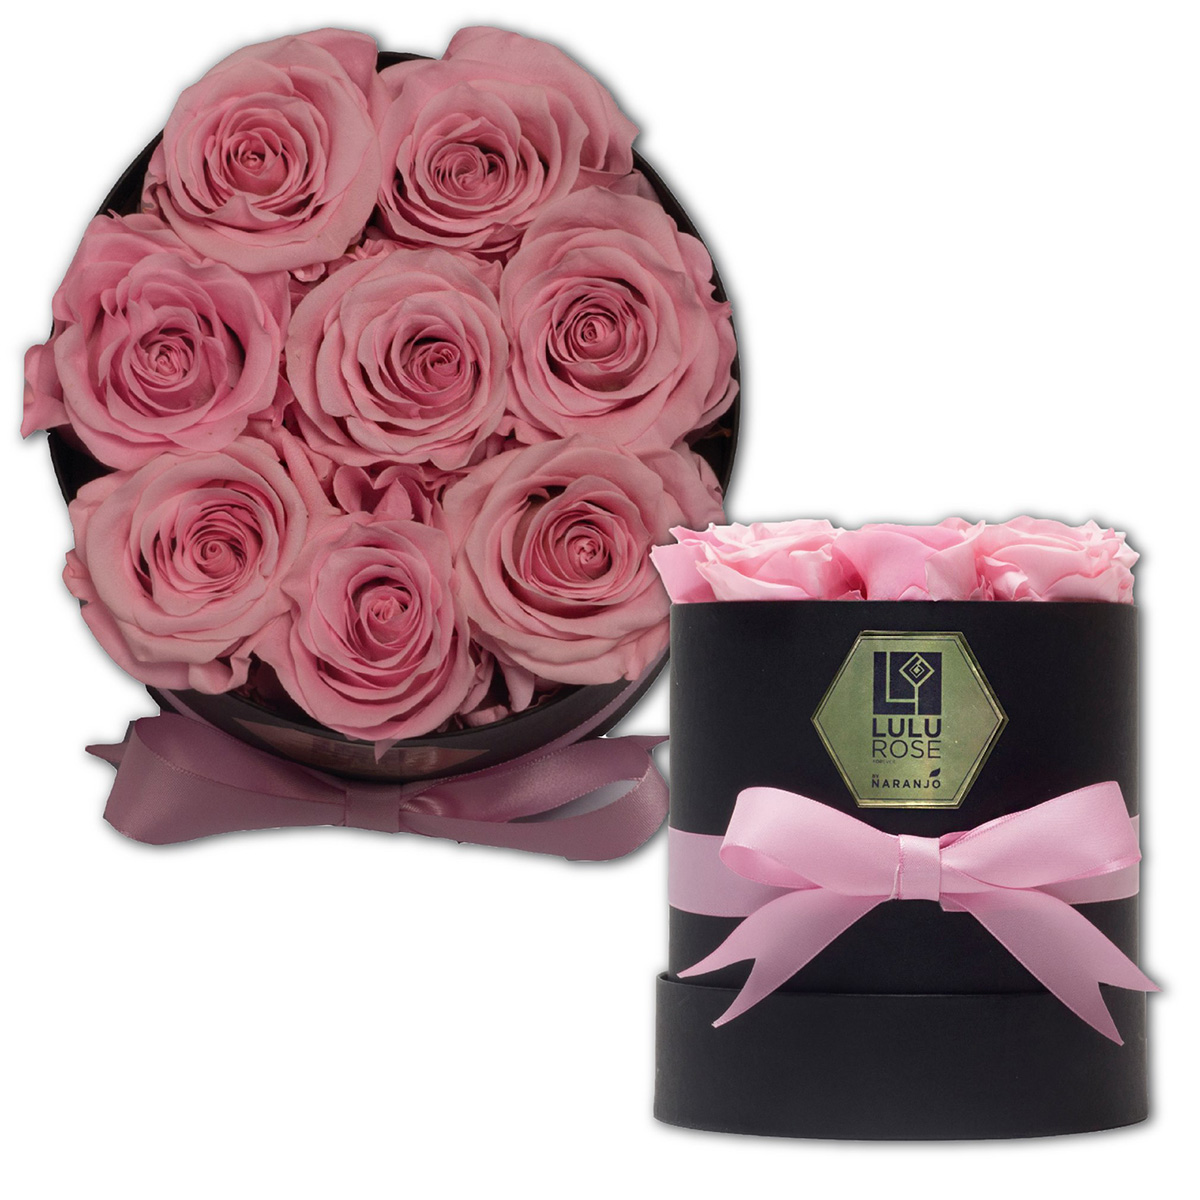 20 Flowers That Fit Into Your Genuine Pink Color Palette - Lulu Eternal Roses 2